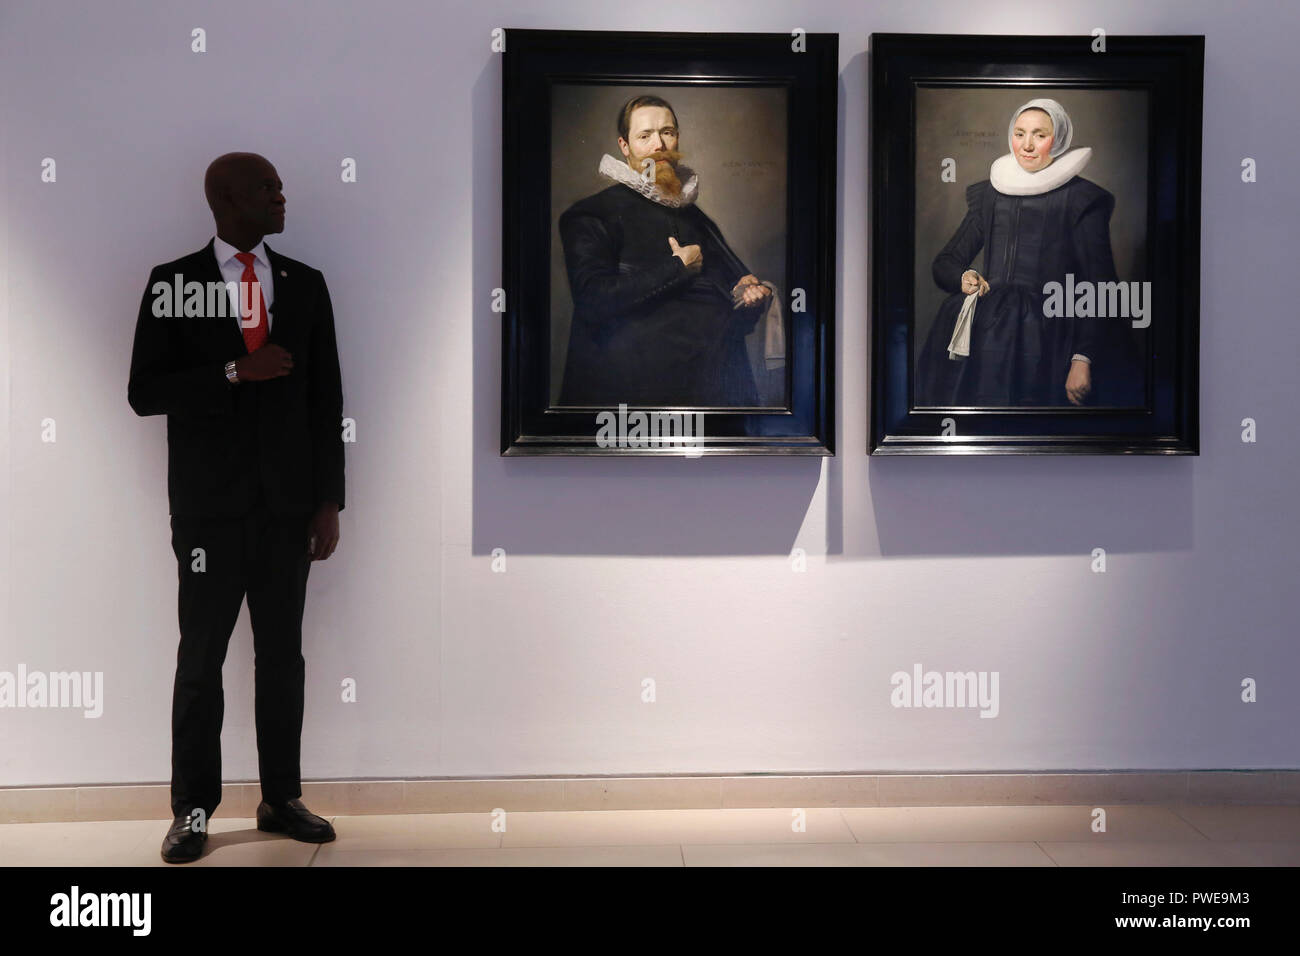 London, UK, 16th Oct 2018. A Christie's employee stands beside Dutch master Frans Hals 's works 'Portrait of a Gentleman holding a pair of gloves' and ' Portrait of a lady holding a handkerchief' at Christie's AuctionHouse in London, UK, Tuesday October 16, 2017. The pair is expected to achieve up to £12million when they come to auction as part of the Albada Jelgersma Collection sale during Christie's Classic Week in December. Photograph : Credit: Luke MacGregor/Alamy Live News Stock Photo